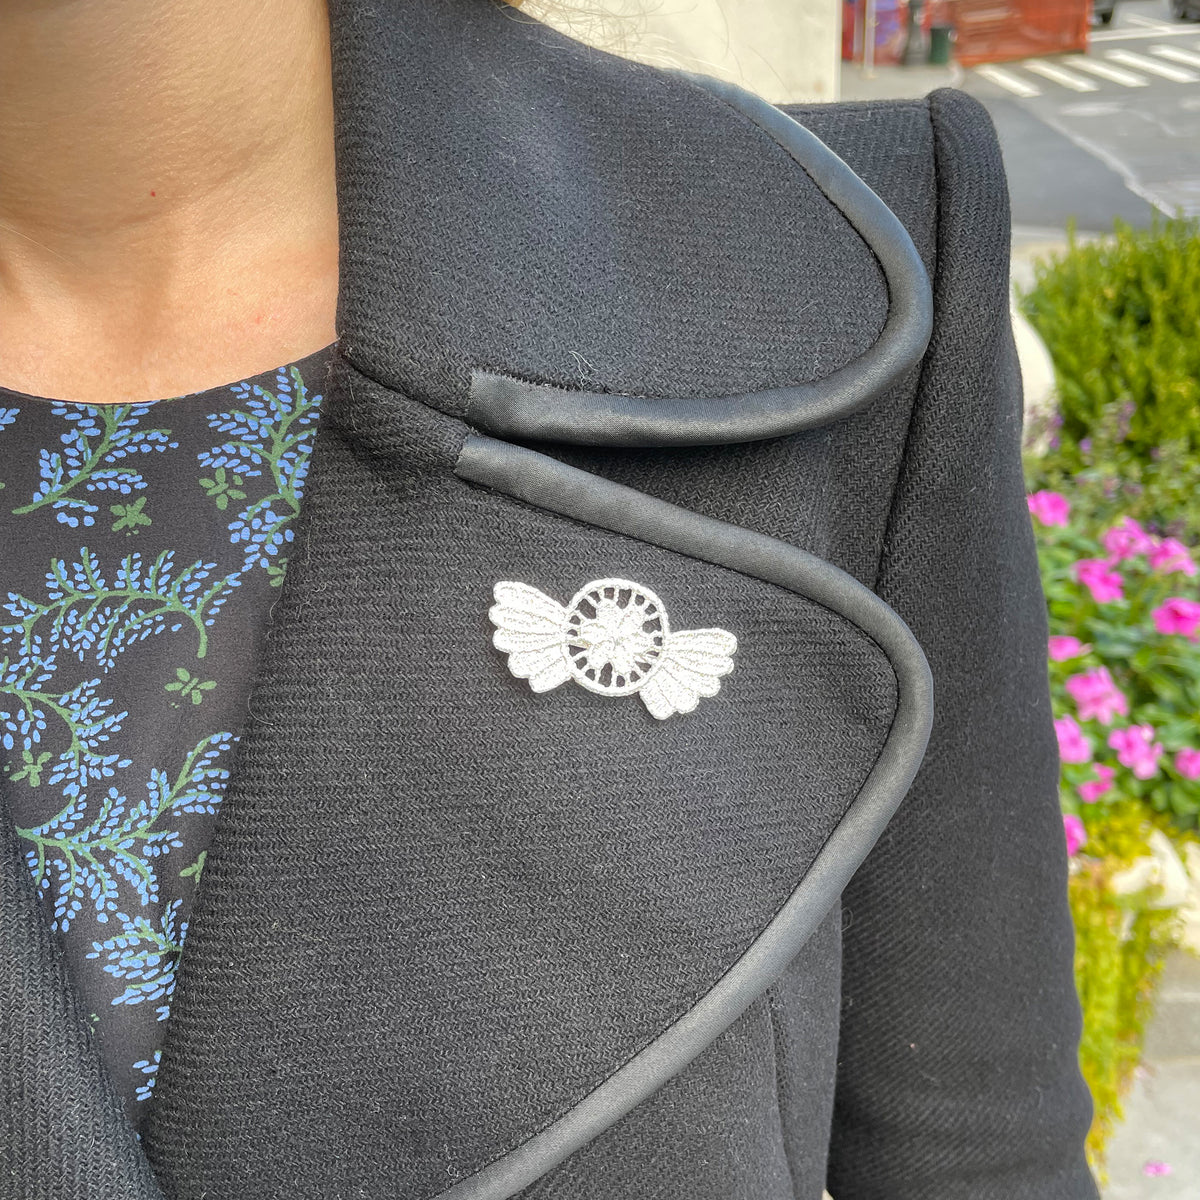 Lapel Pin, 24k gold Lace Flower with Topaz for Wedding - Monika Knutsson